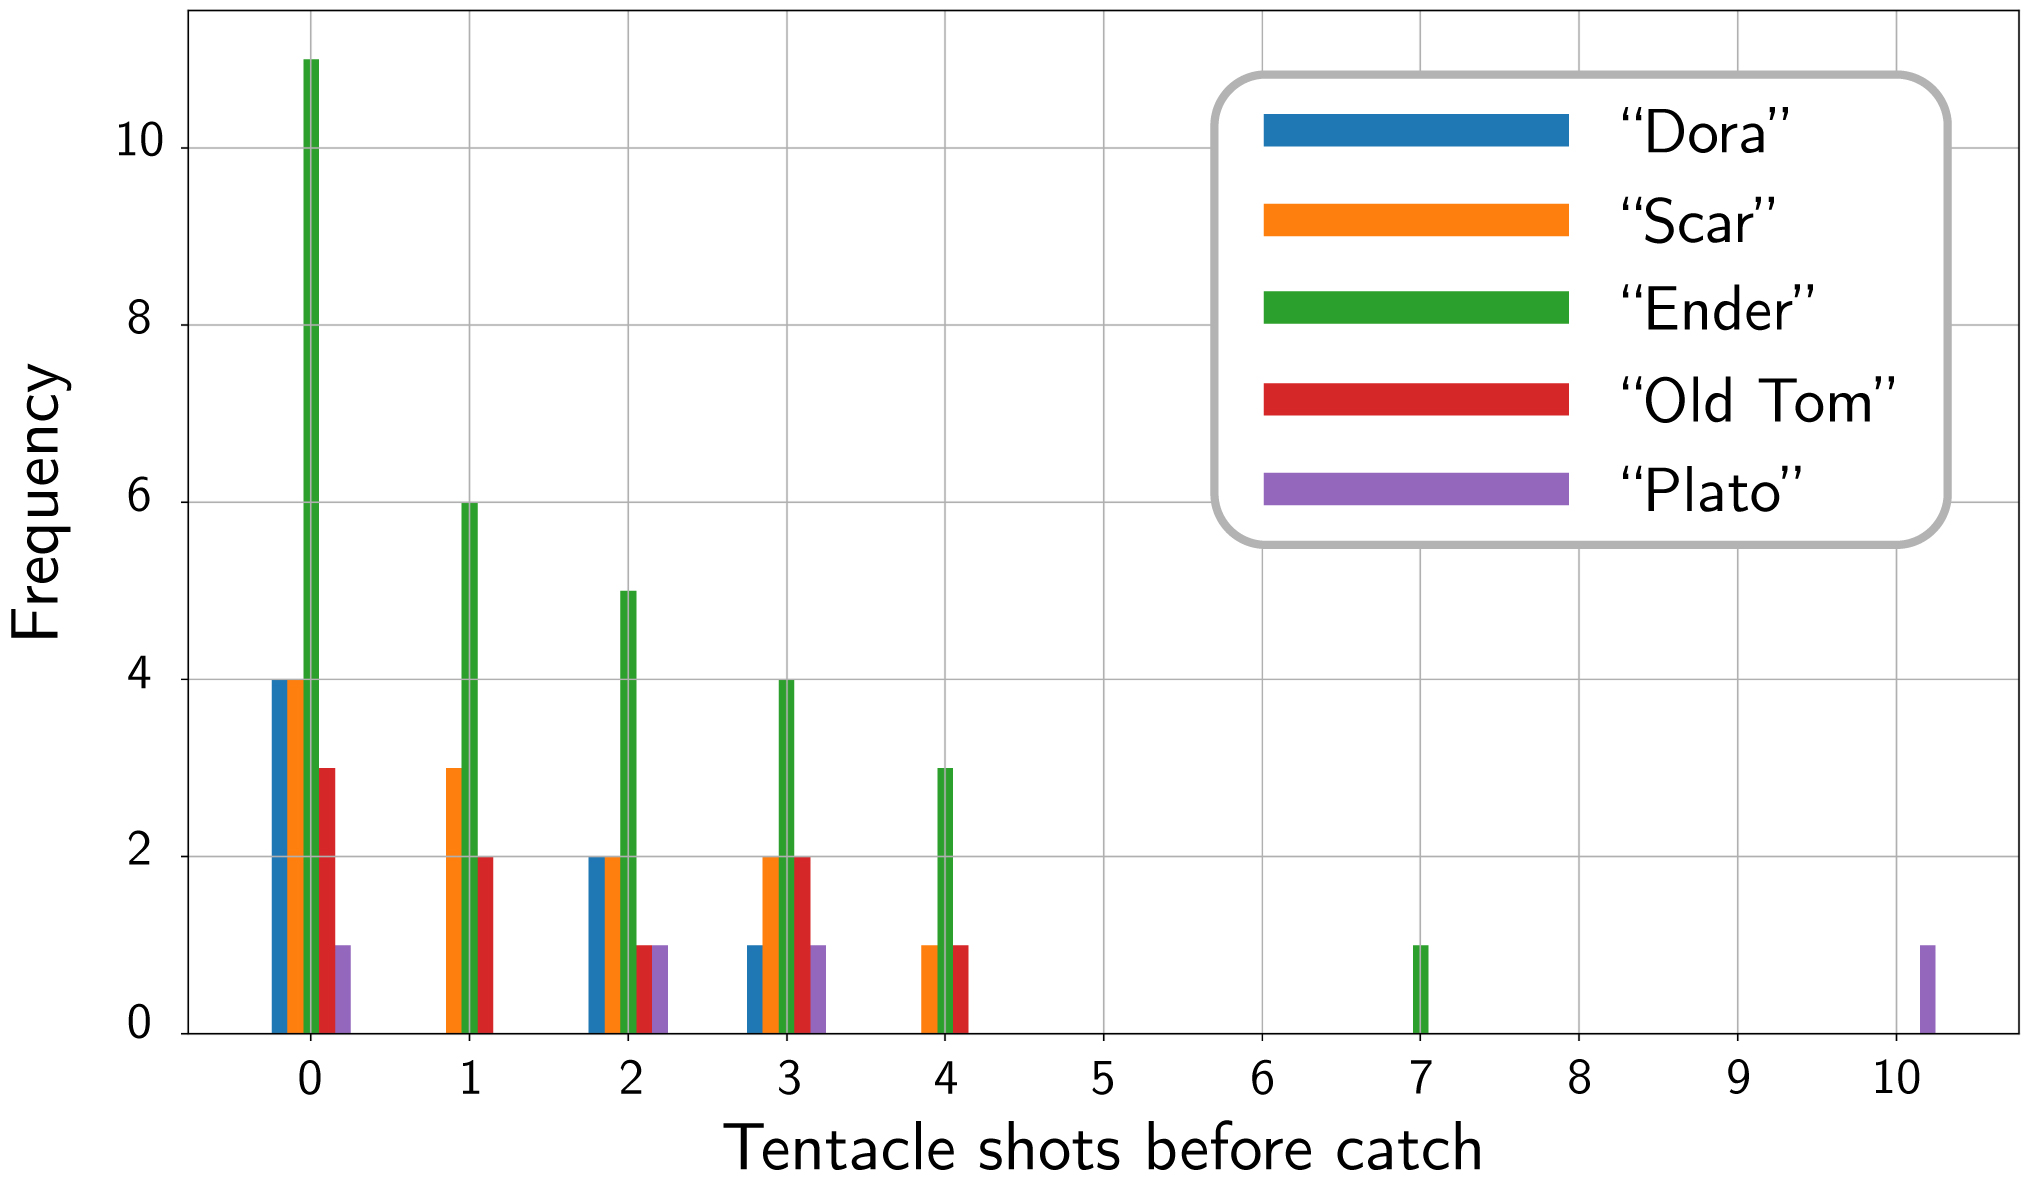 Figure S5: Number of tentacle shots before a catch for all animals